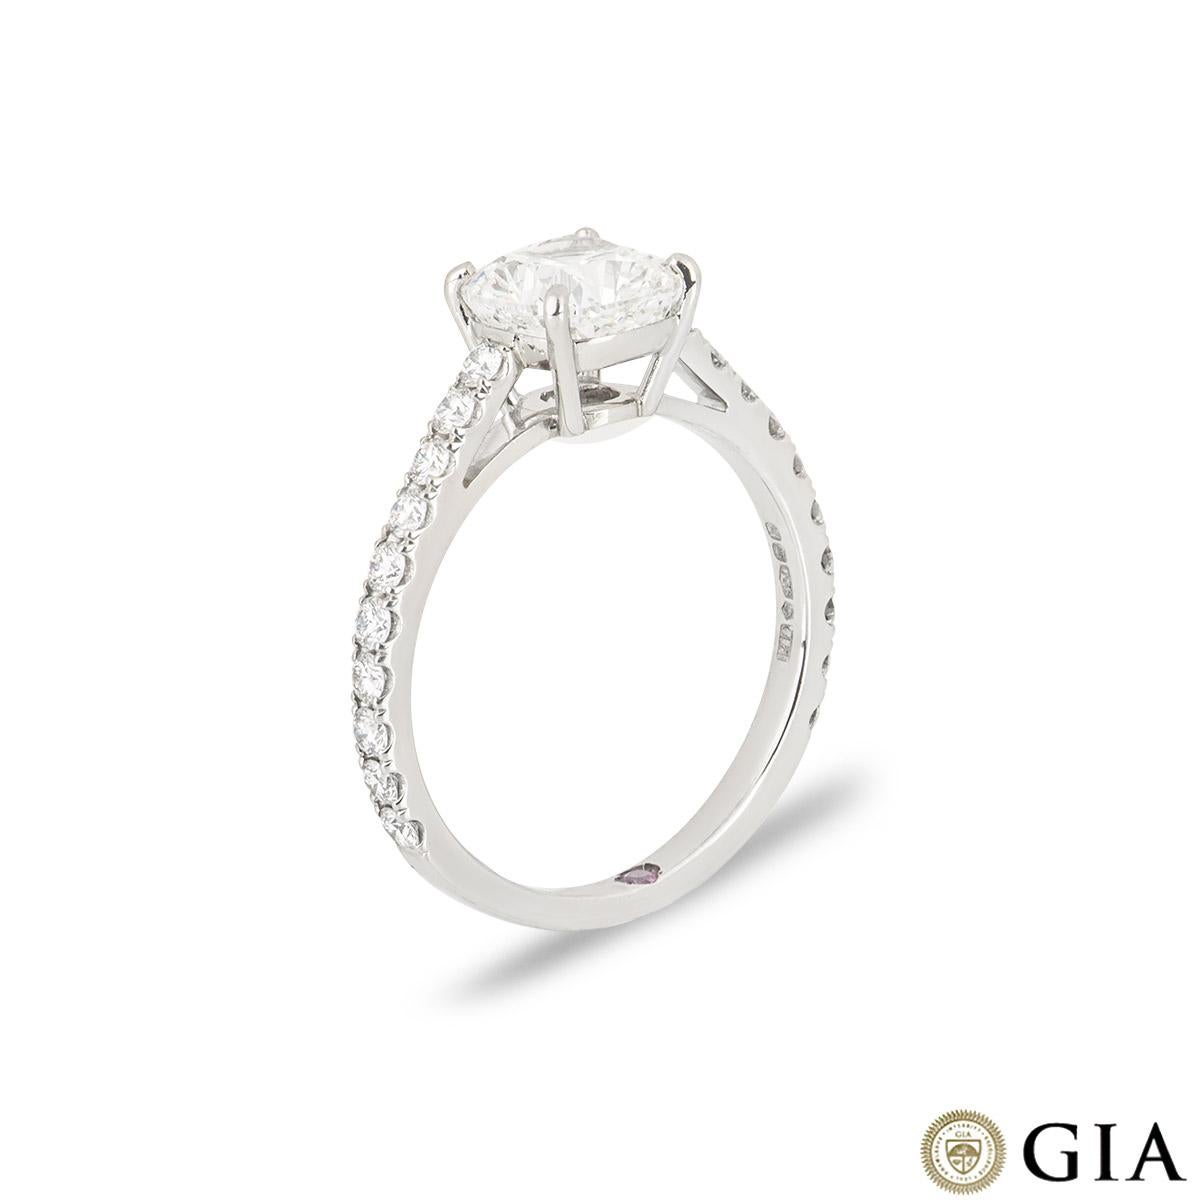 A stunning platinum cushion cut diamond engagement ring. The ring features a cushion cut diamond set to the centre in a 4 claw setting weighing 1.55ct, G colour, and VVS1 clarity. The central diamond is complemented by 20 round brilliant cut